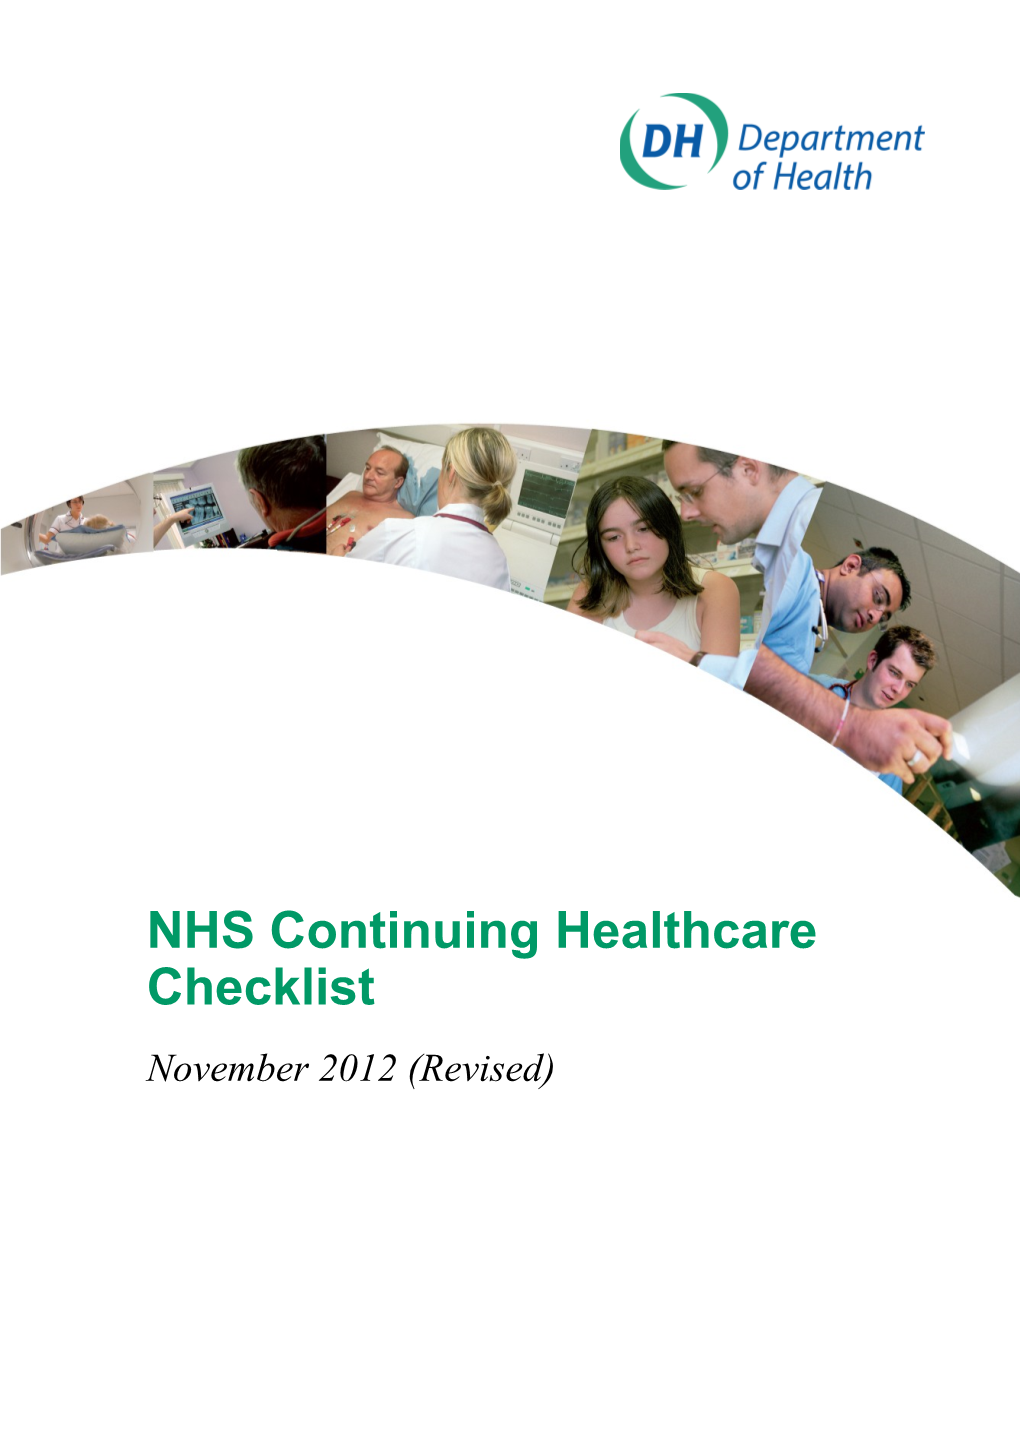 NHS Continuing Healthcare Checklist